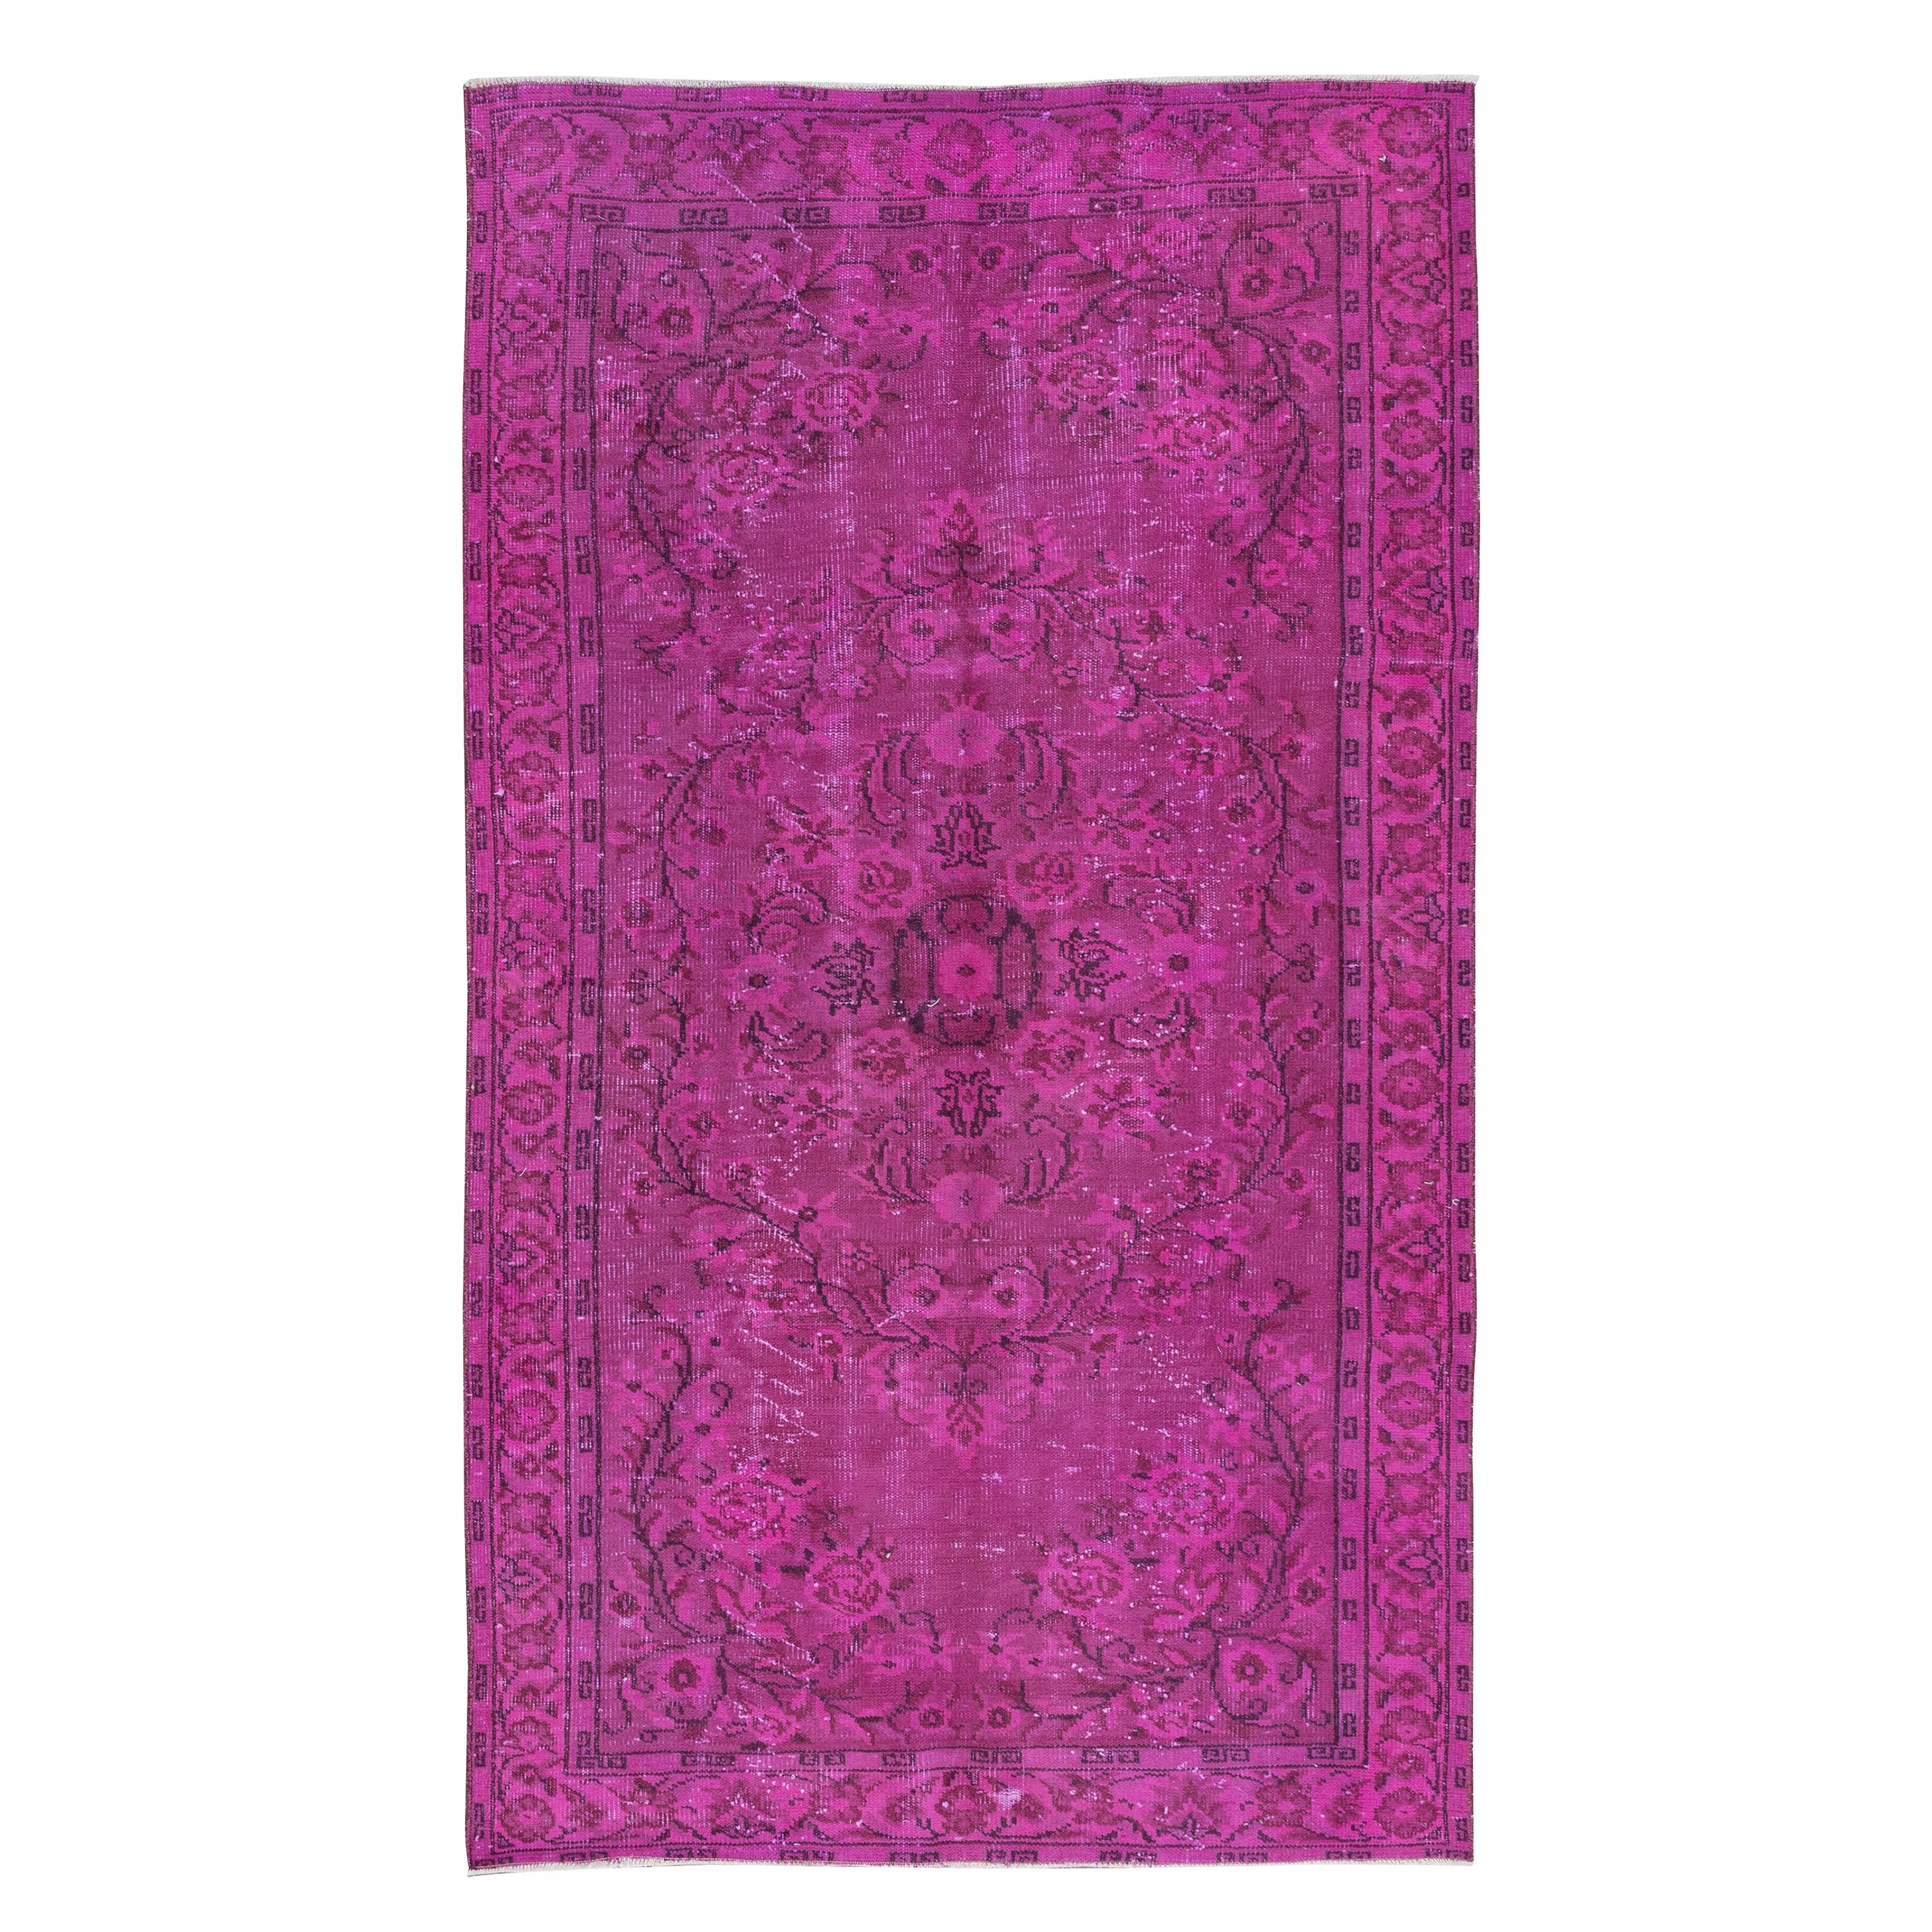 4.5x7.8 Ft Contemporary Pink Area Rug, Handmade Turkish Carpet, Floor Covering For Sale